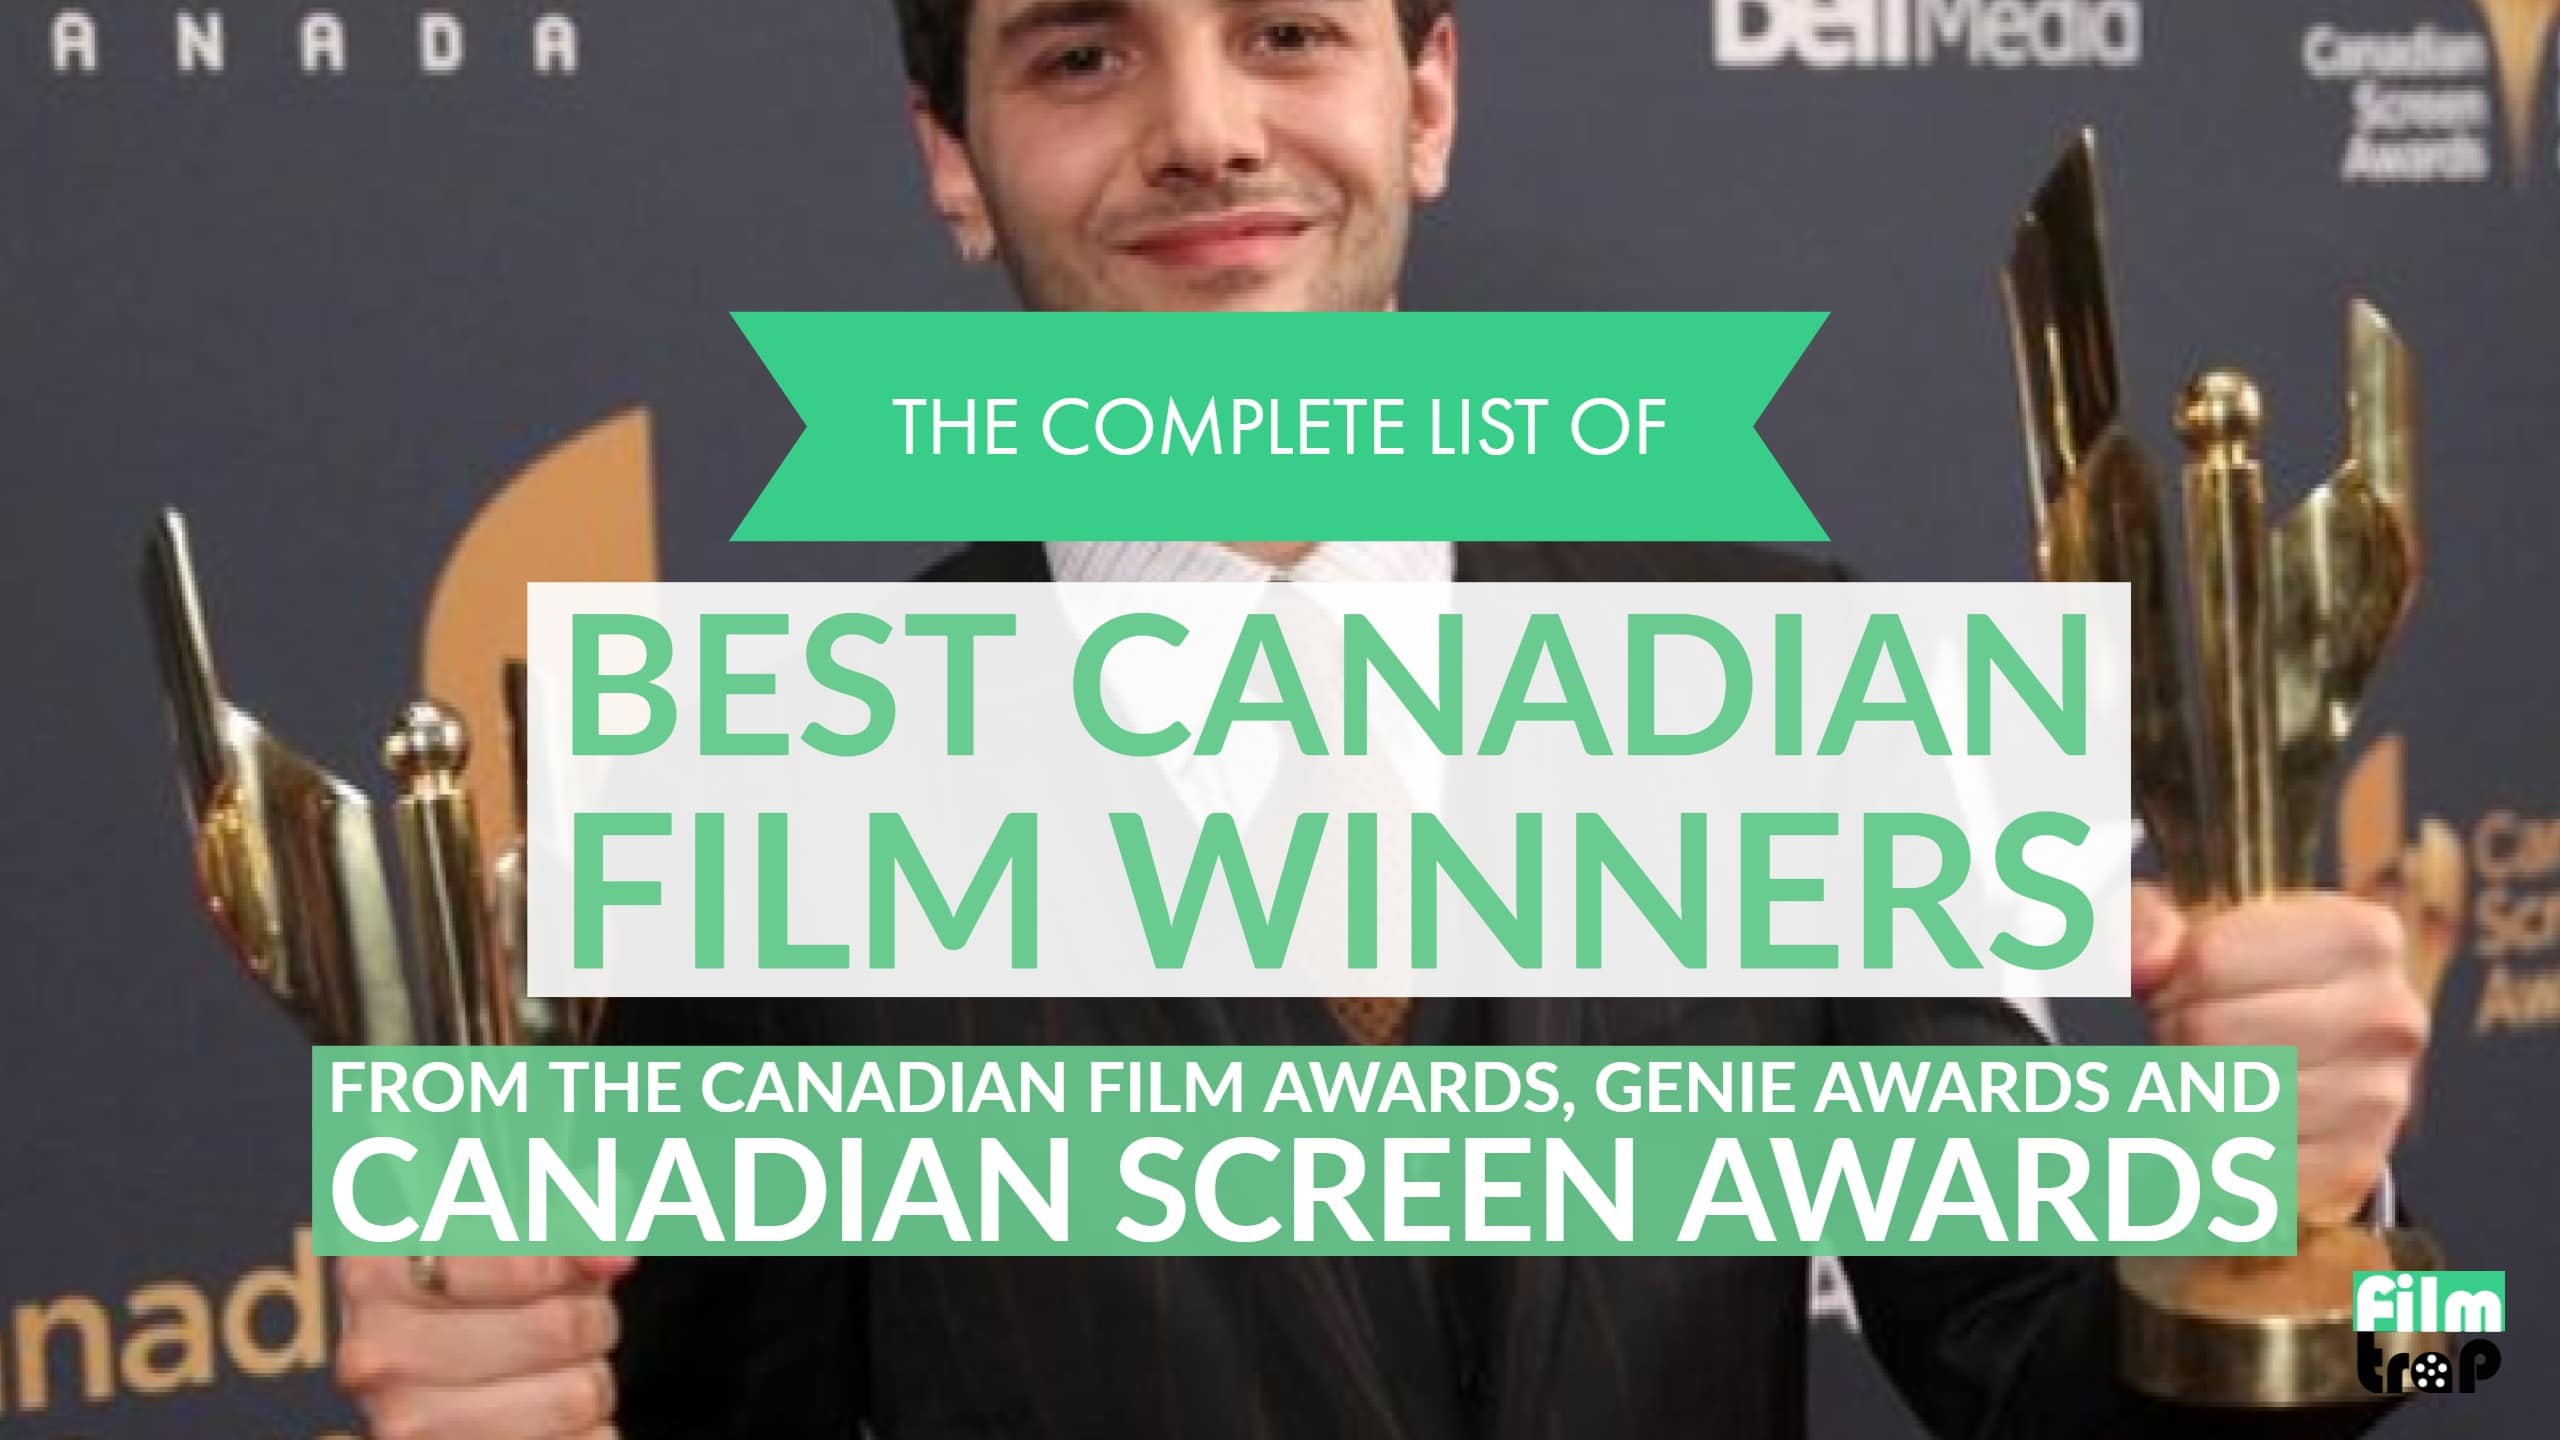 The Complete List of Best Canadian Film Winners from the Canadian Film Awards, Genie Awards and Canadian Screen Awards